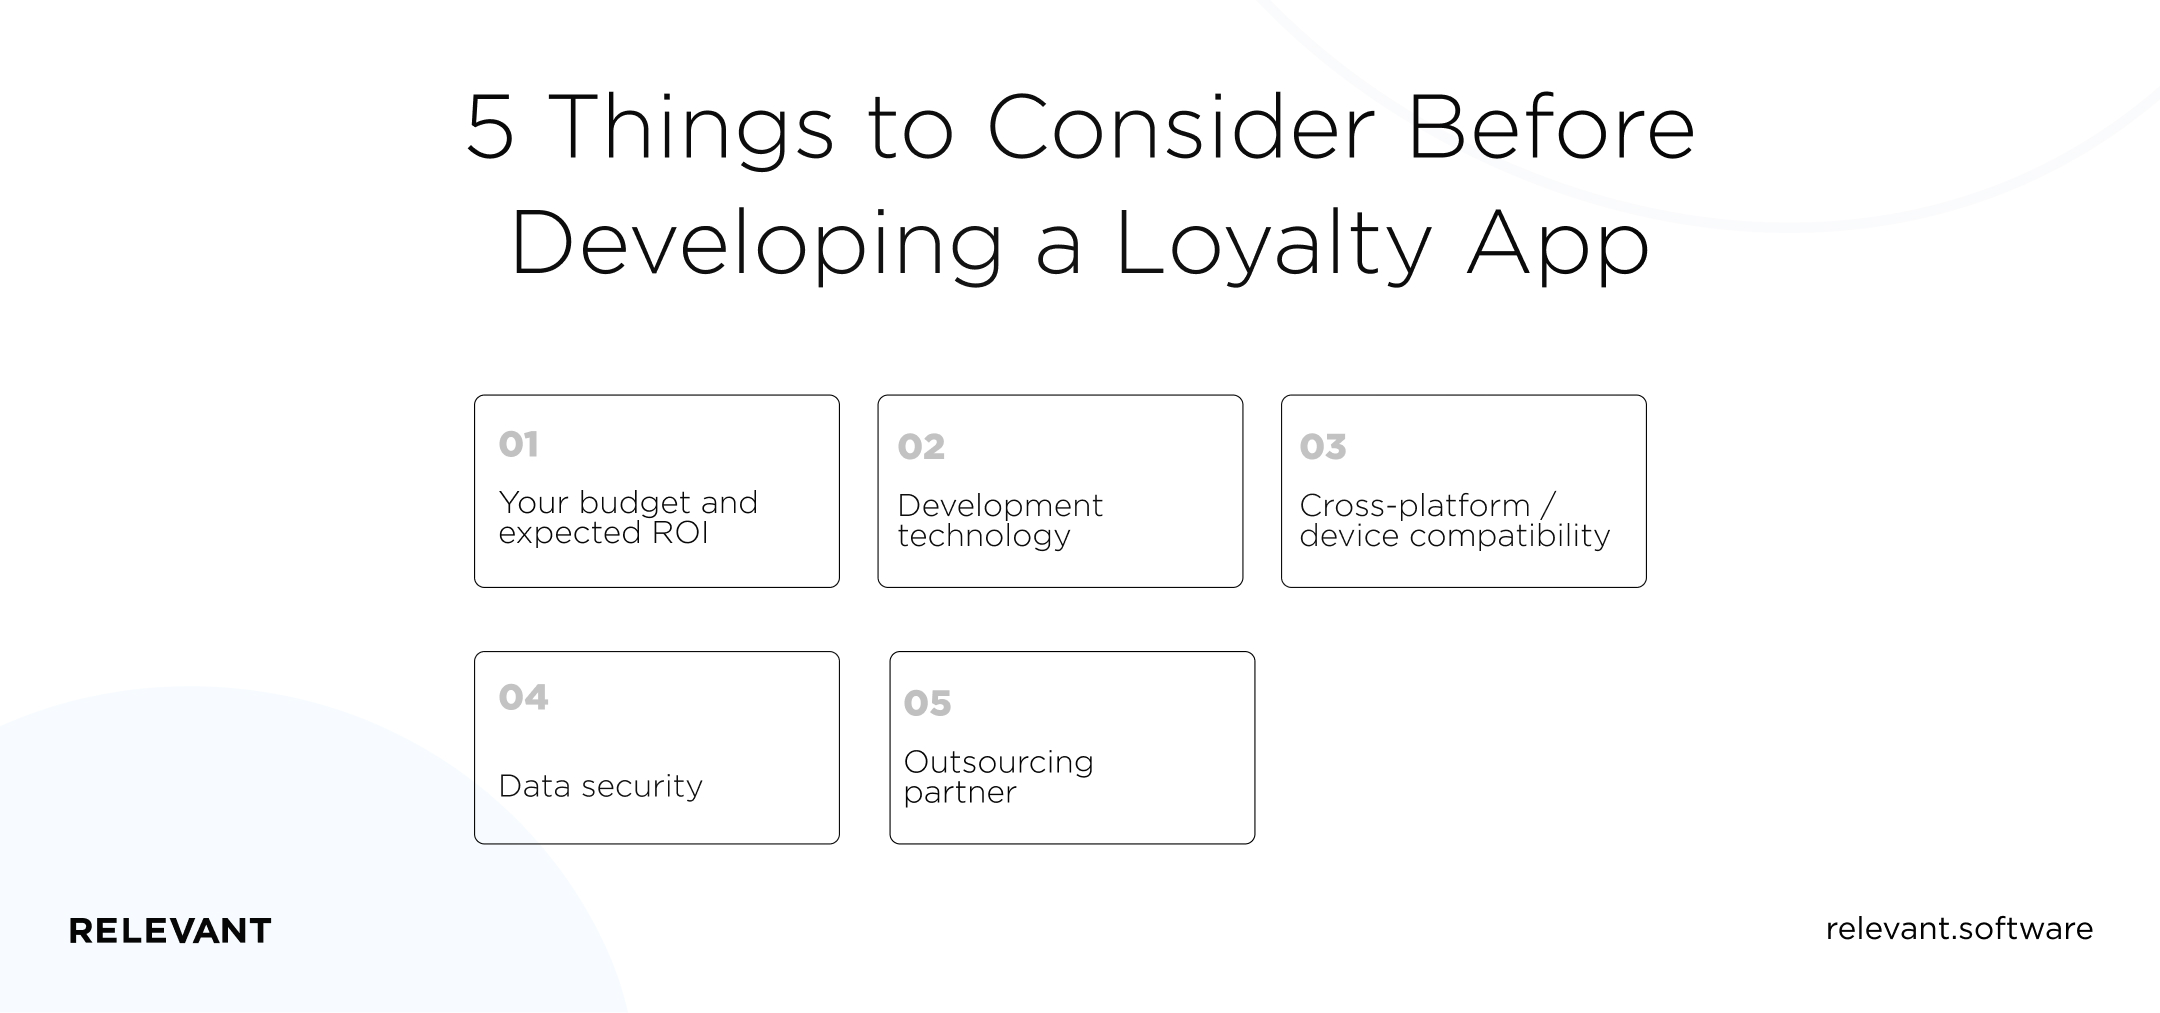 5 Things to Consider Before Developing a Loyalty App